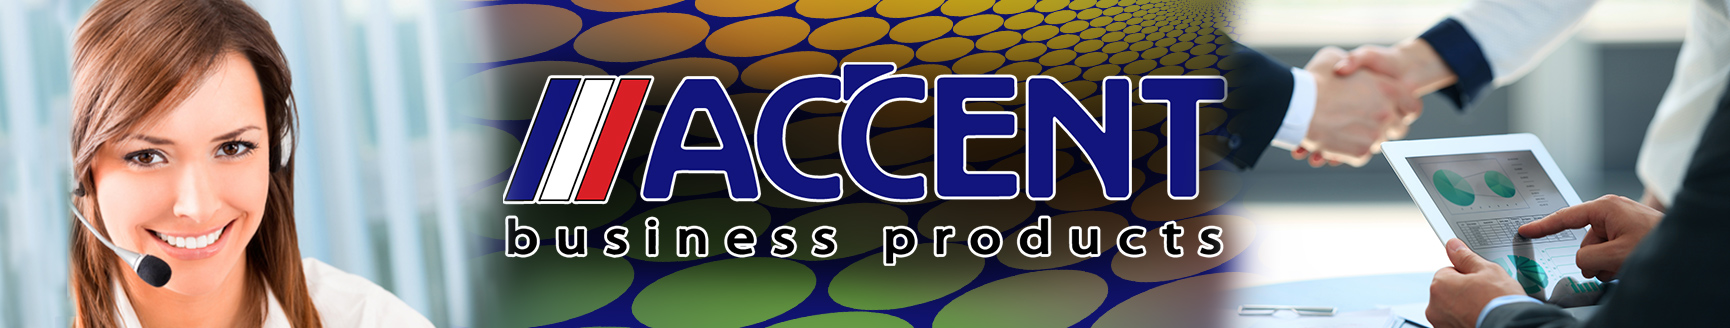 Accent Business Products Reviews